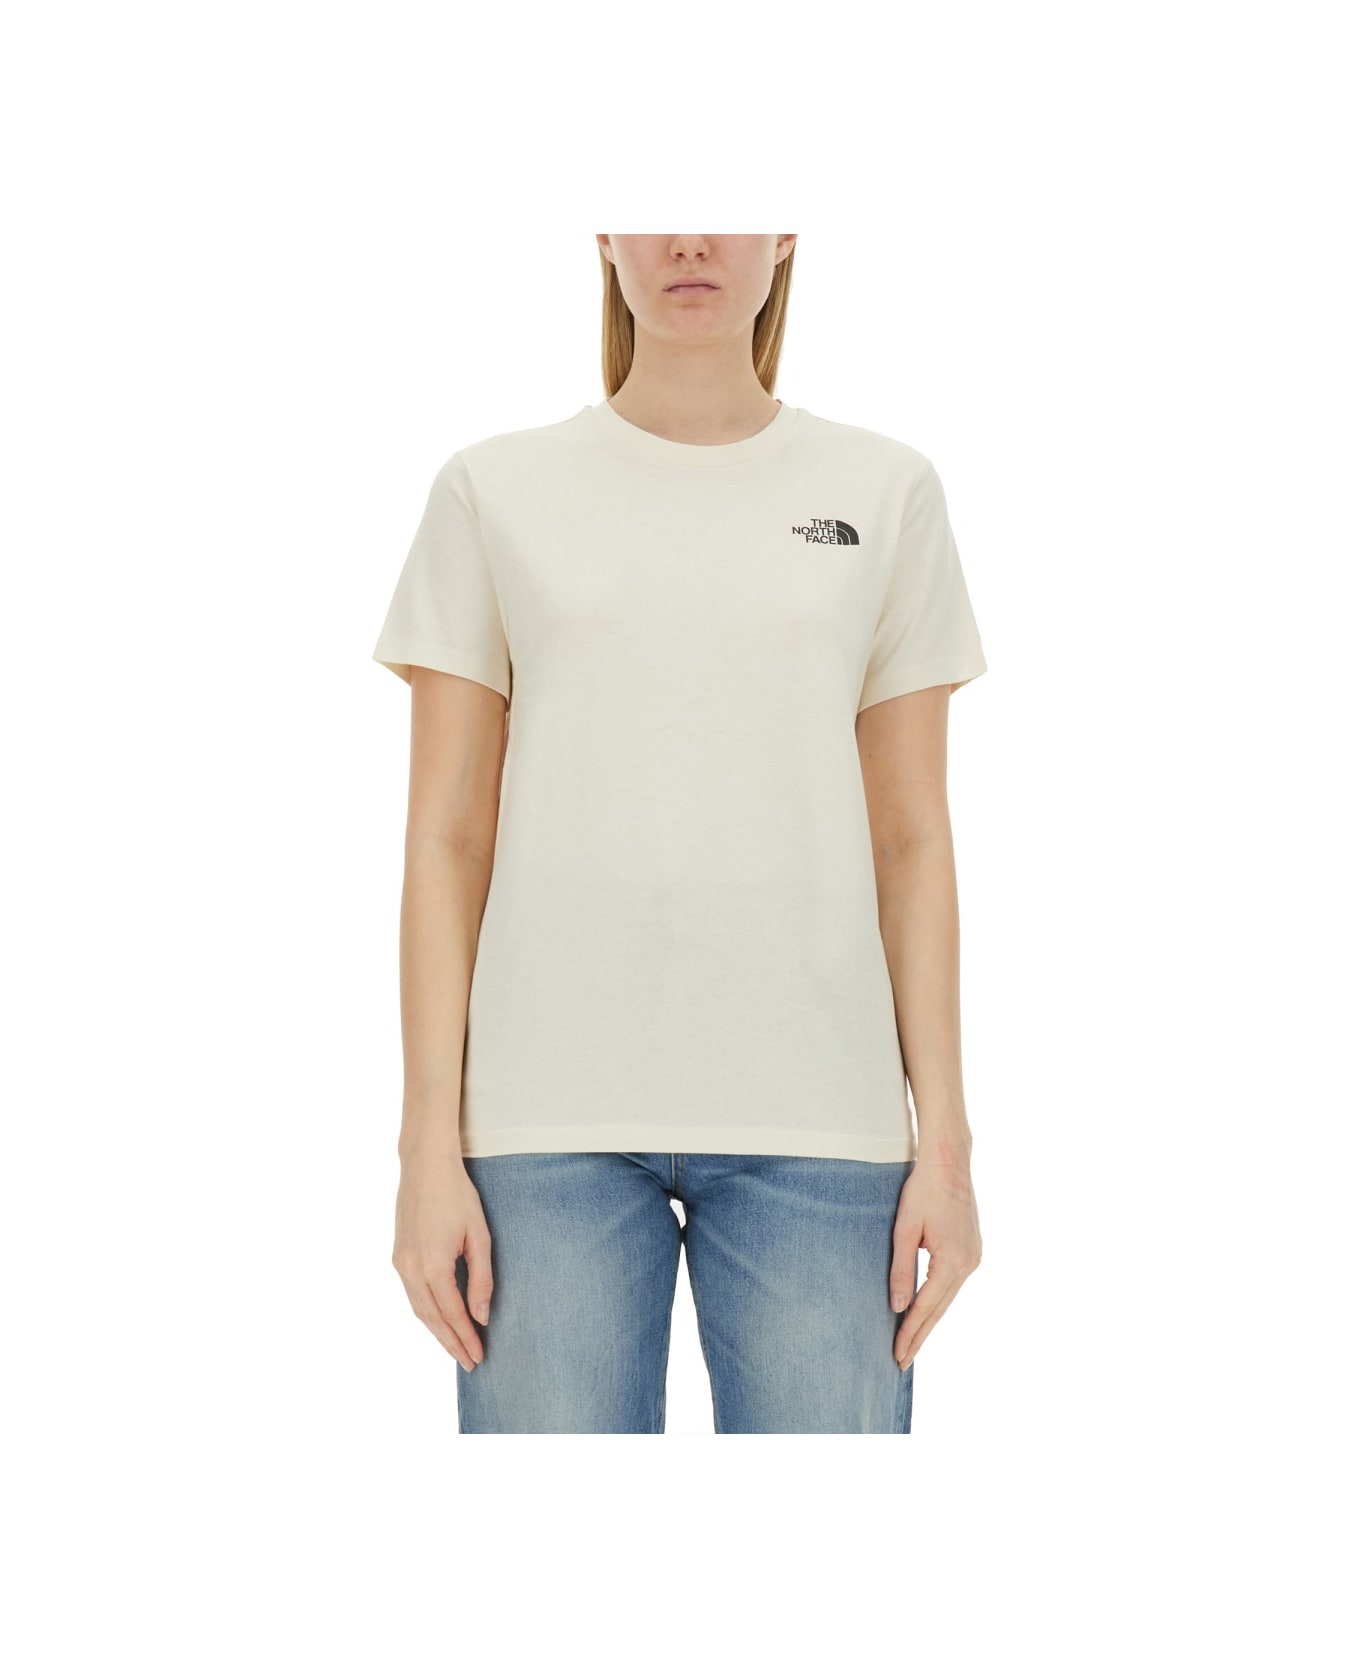 The North Face T-shirt With Logo